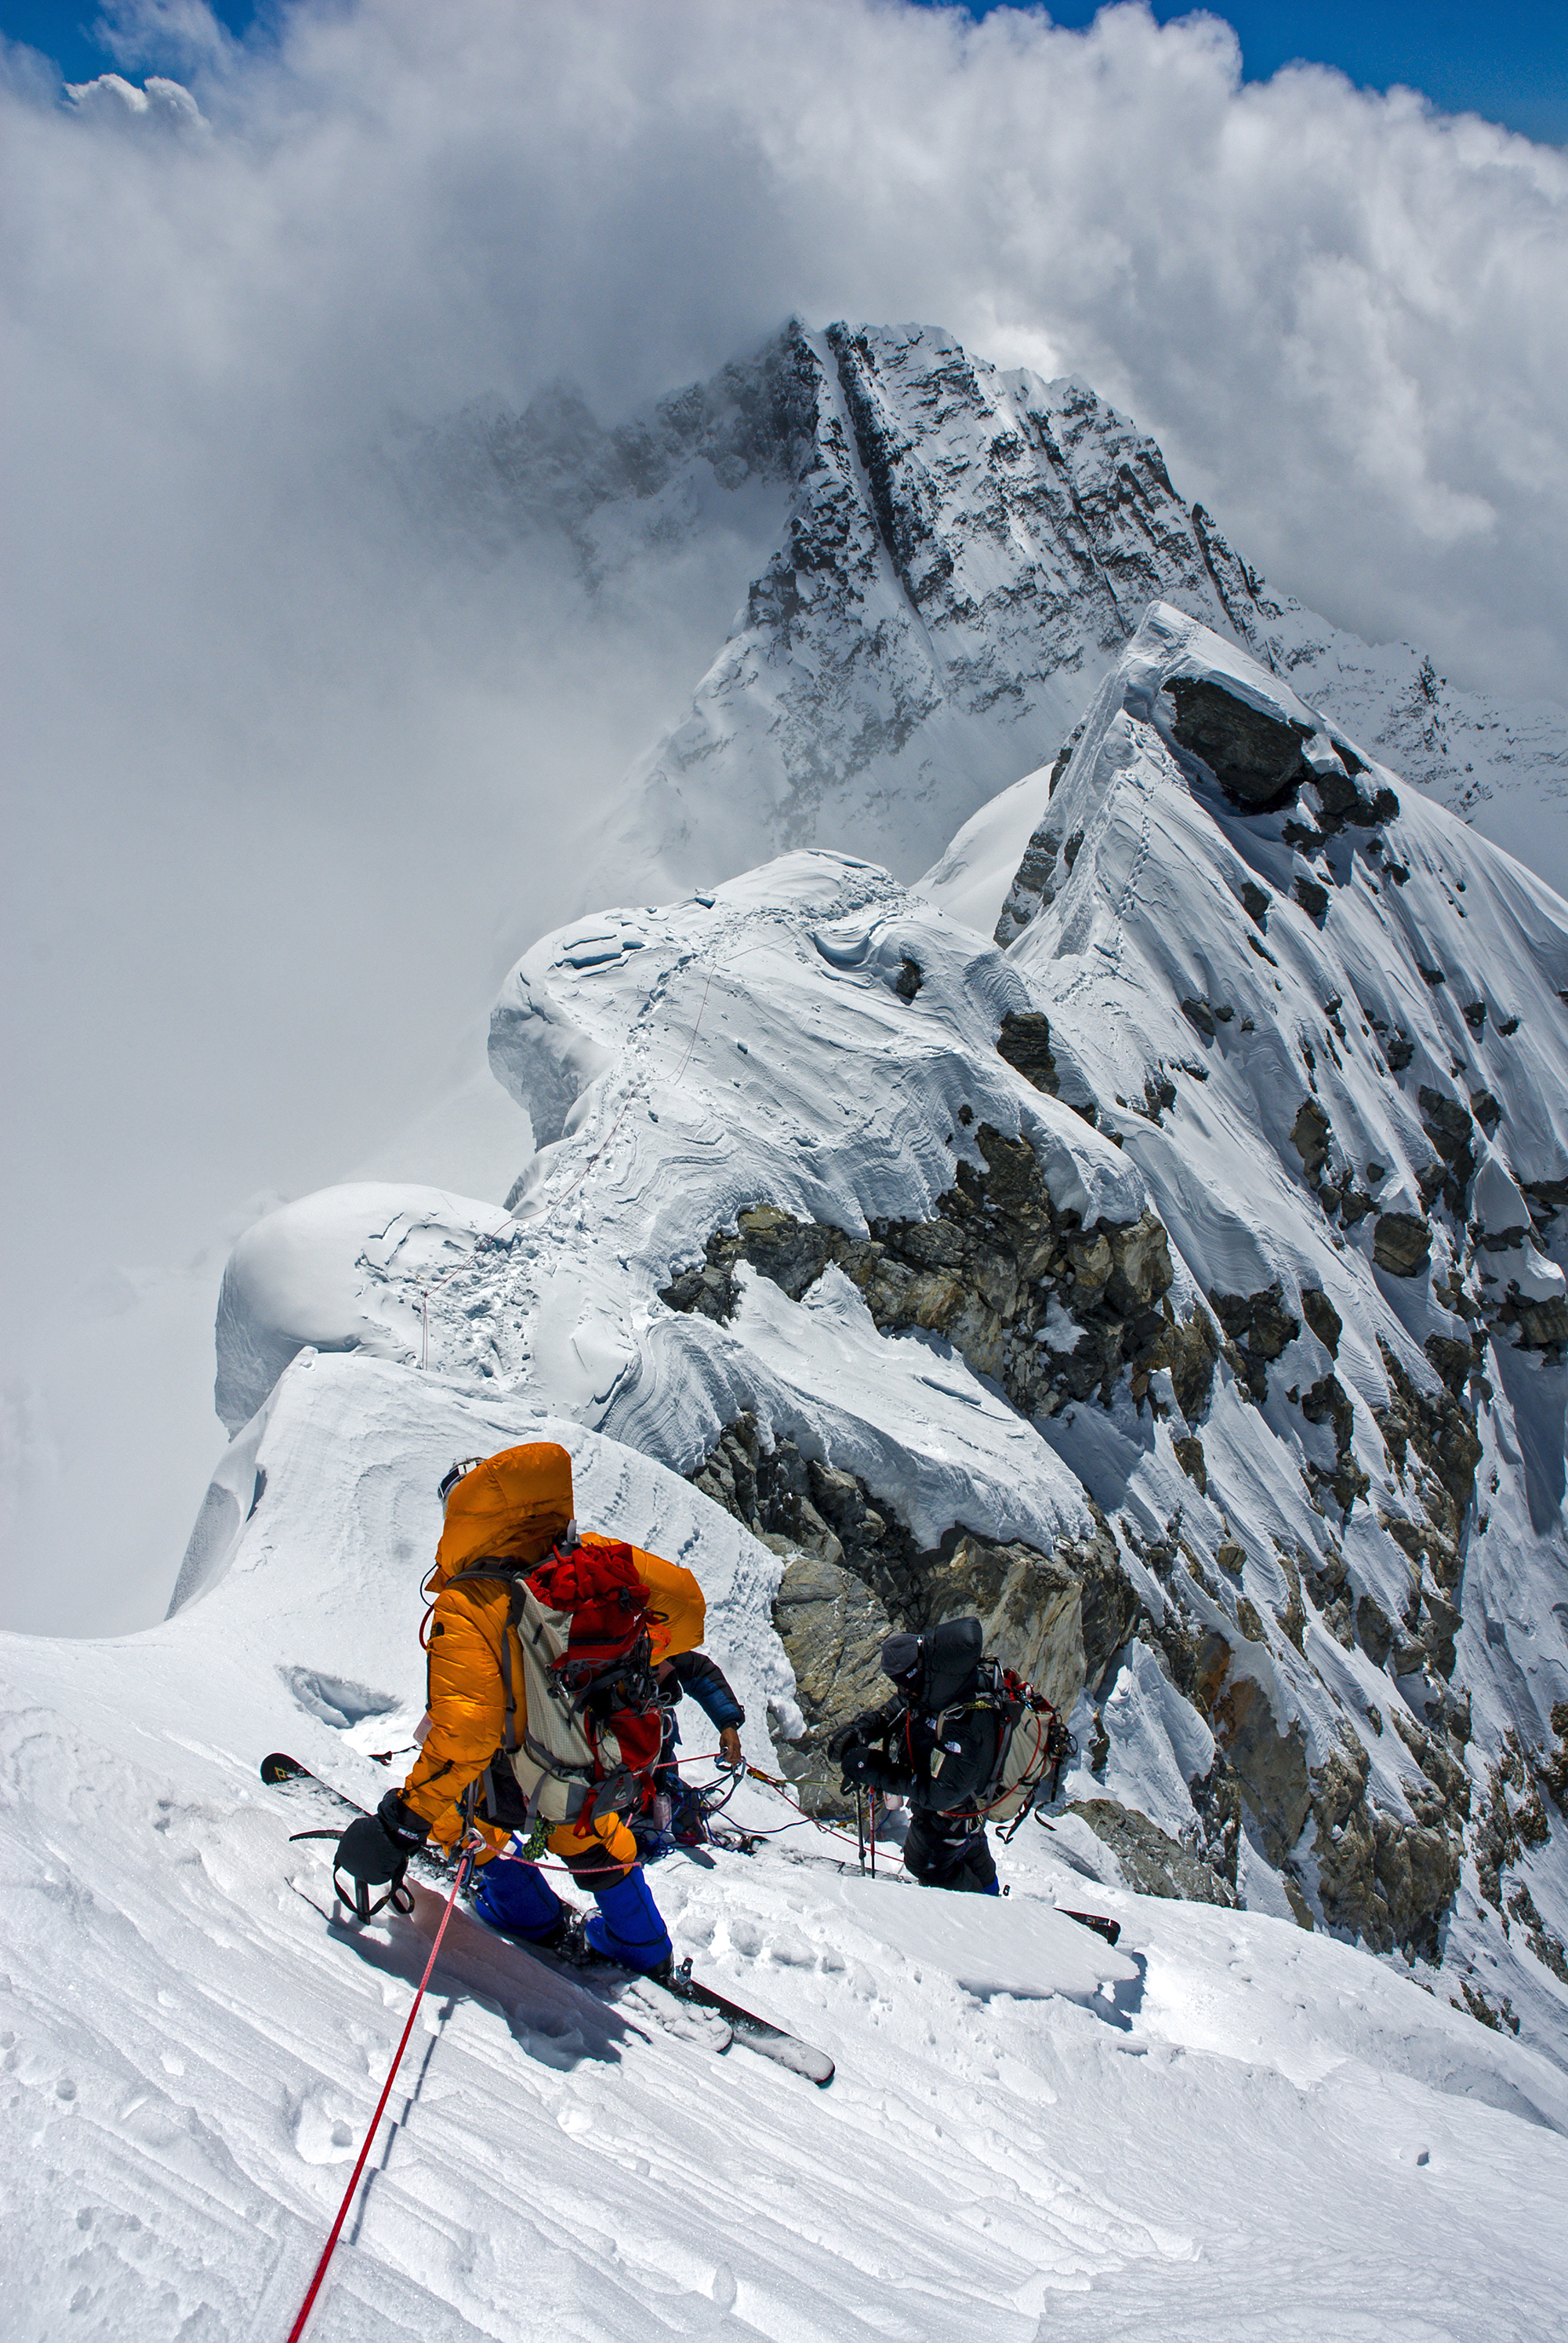 ‘Skiing Everest’, 2006, By Jimmy Chin